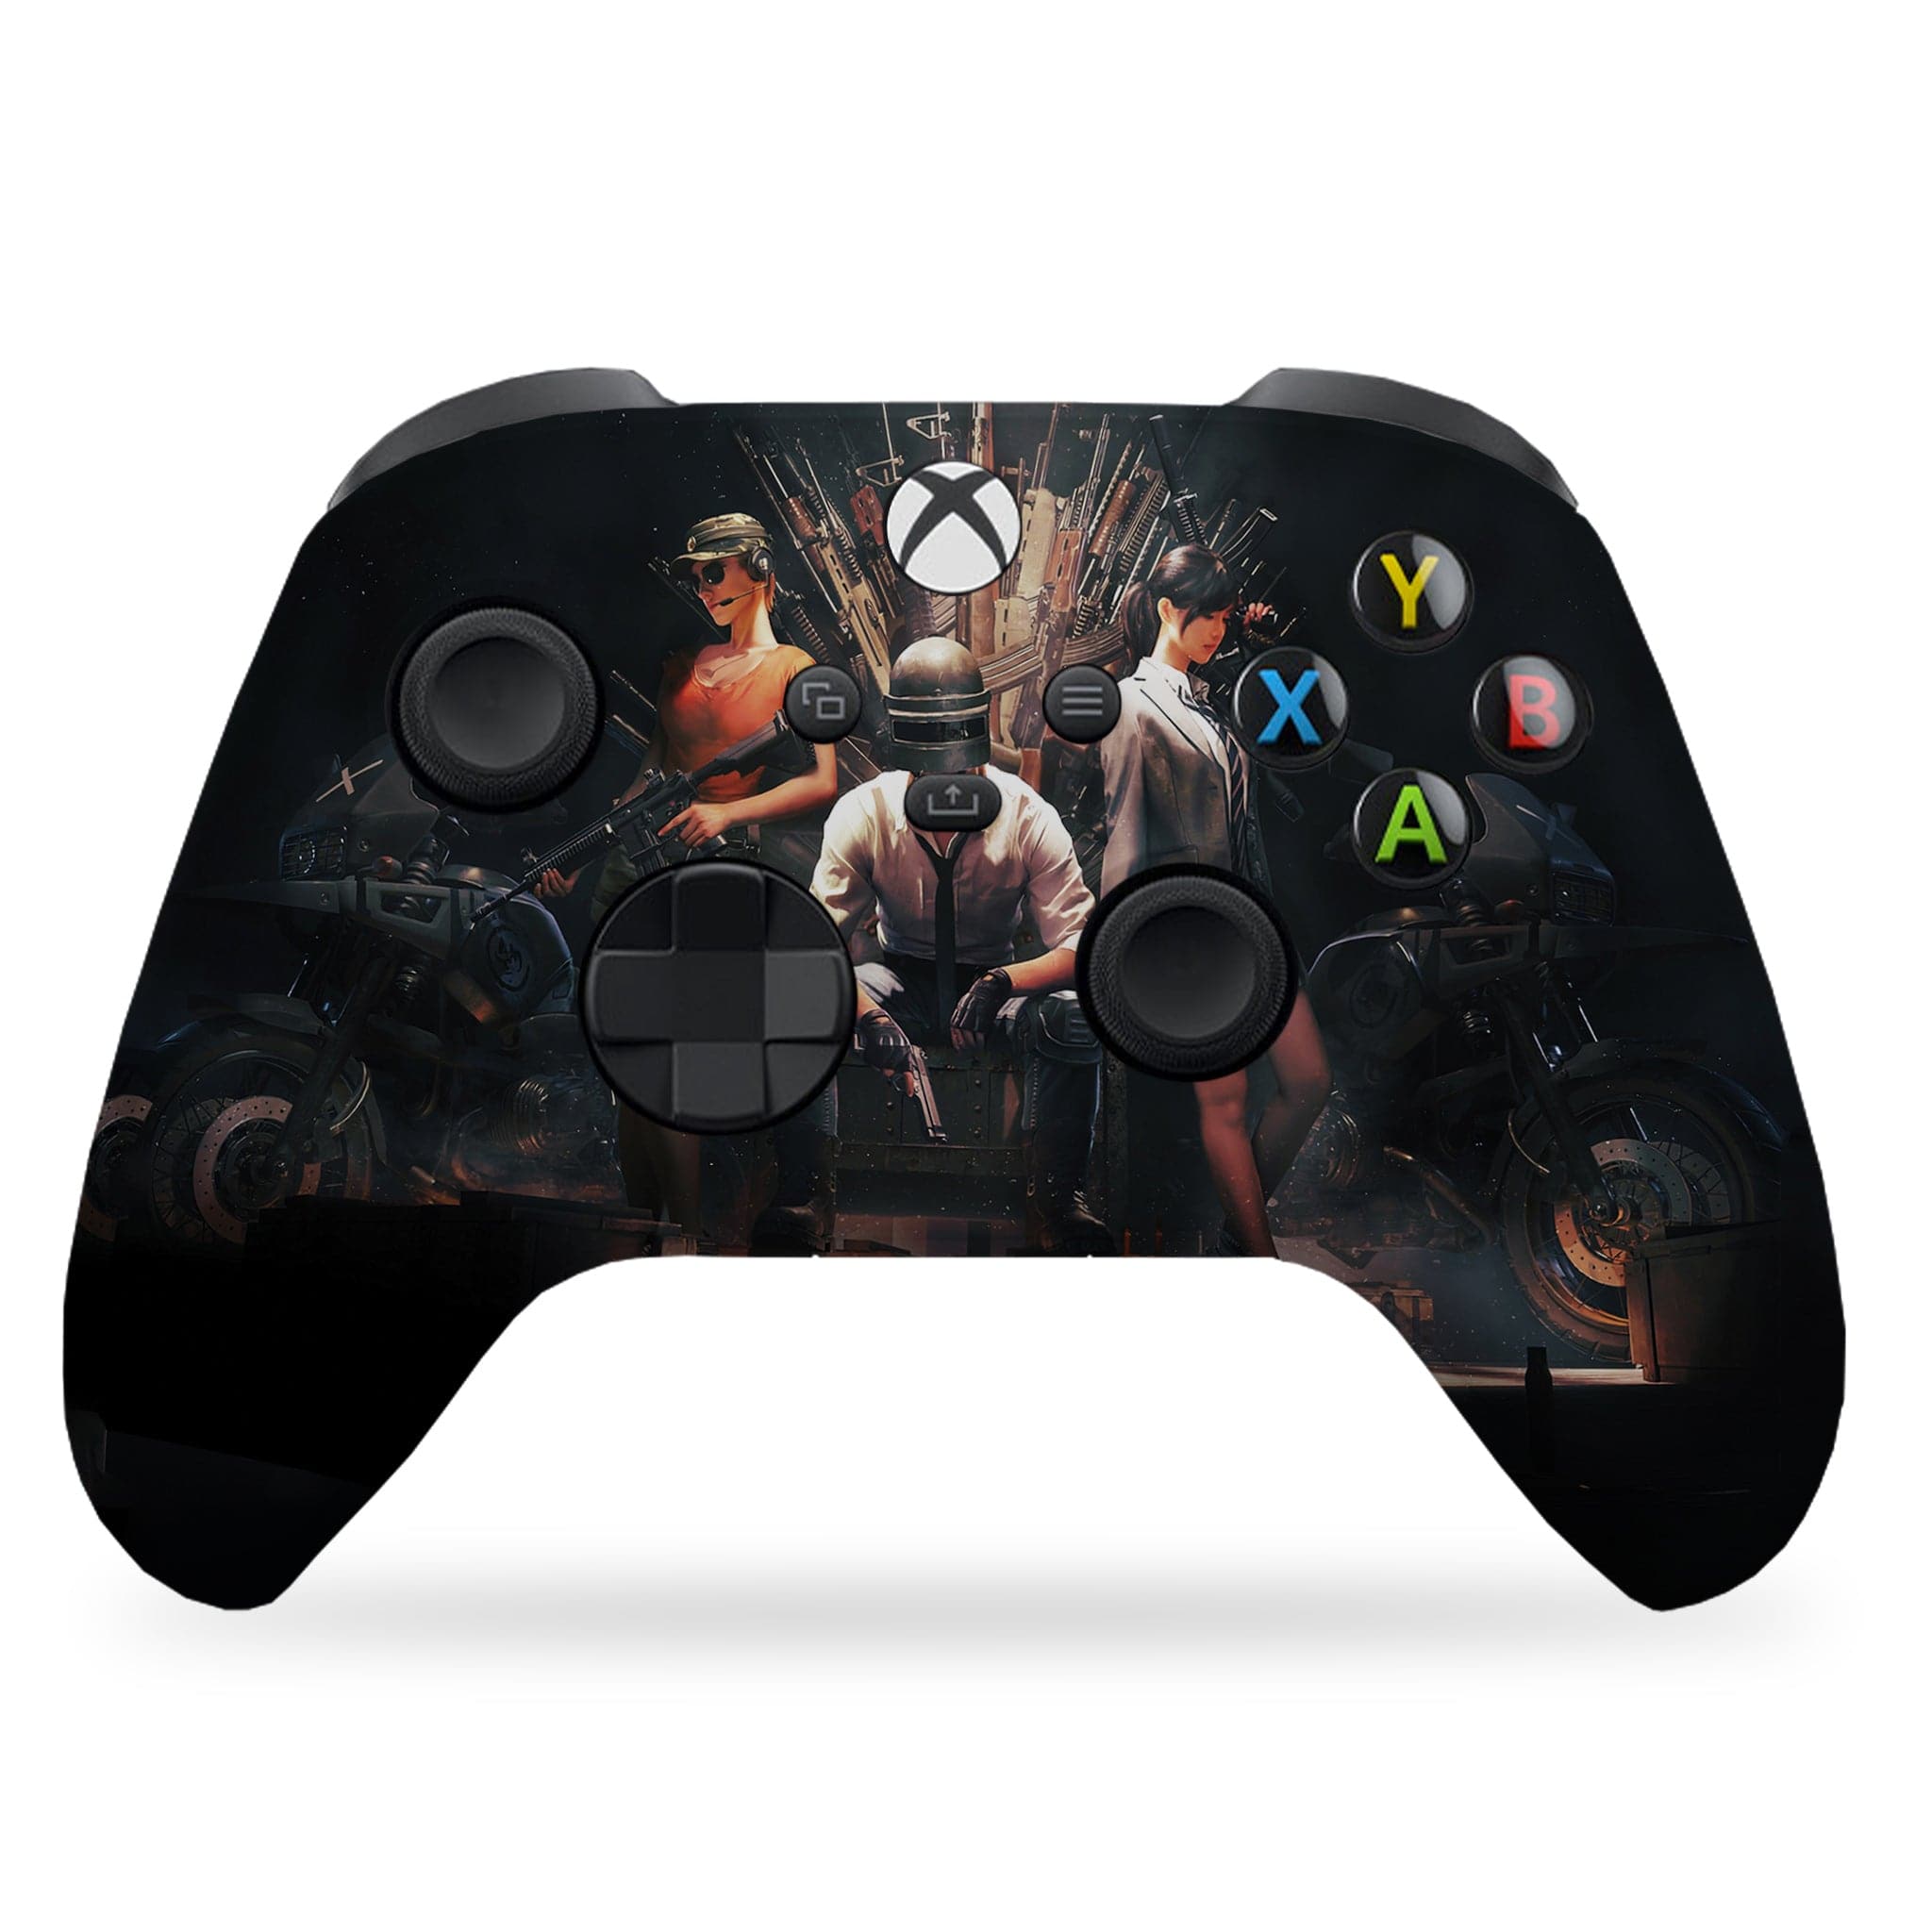 PUBG King Throne inspired Xbox Series X Controller